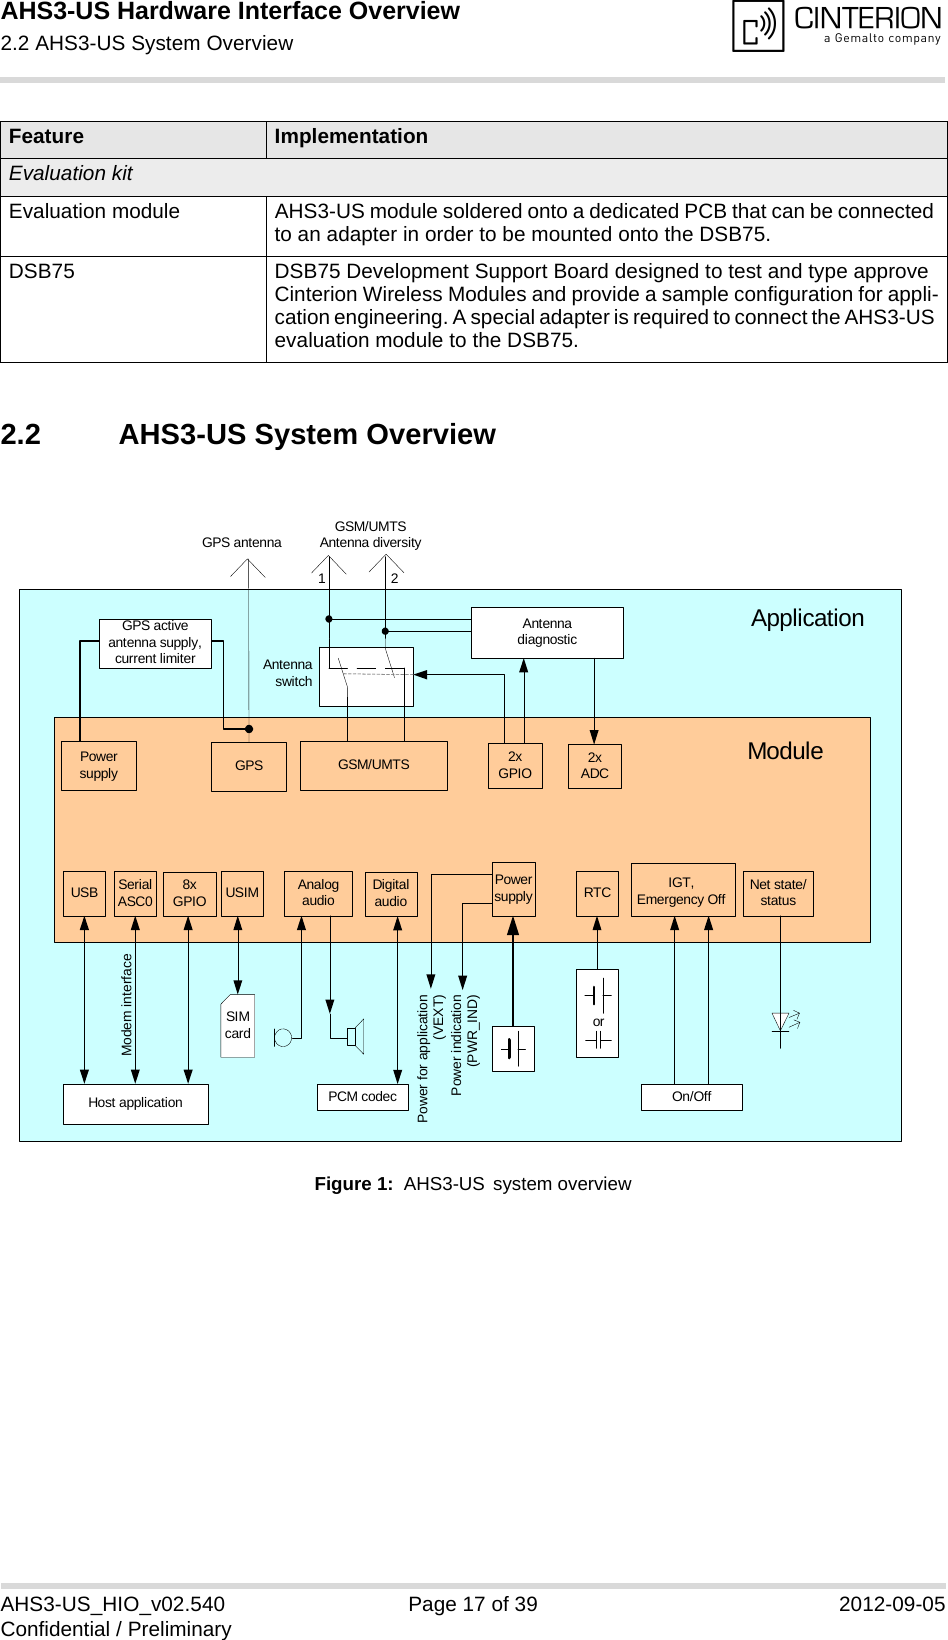 AHS3-US Hardware Interface Overview2.2 AHS3-US System Overview17AHS3-US_HIO_v02.540 Page 17 of 39 2012-09-05Confidential / Preliminary2.2 AHS3-US System OverviewFigure 1:  AHS3-US system overviewEvaluation kitEvaluation module AHS3-US module soldered onto a dedicated PCB that can be connected to an adapter in order to be mounted onto the DSB75.DSB75  DSB75 Development Support Board designed to test and type approve Cinterion Wireless Modules and provide a sample configuration for appli-cation engineering. A special adapter is required to connect the AHS3-US evaluation module to the DSB75.Feature ImplementationUSB SerialASC0 USIM AnalogaudioPowersupply RTC IGT,Emergency Off Net state/statusSIMcardHost application On/OffModuleApplicationorGSM/UMTS Antenna diversityPower for application (VEXT)Power indication(PWR_IND)Modem interfaceDigitalaudioPCM codecGSM/UMTS12GPSGPS antenna8xGPIO2xGPIOAntenna diagnostic2xADCAntenna switchPower supplyGPS active antenna supply, current limiter